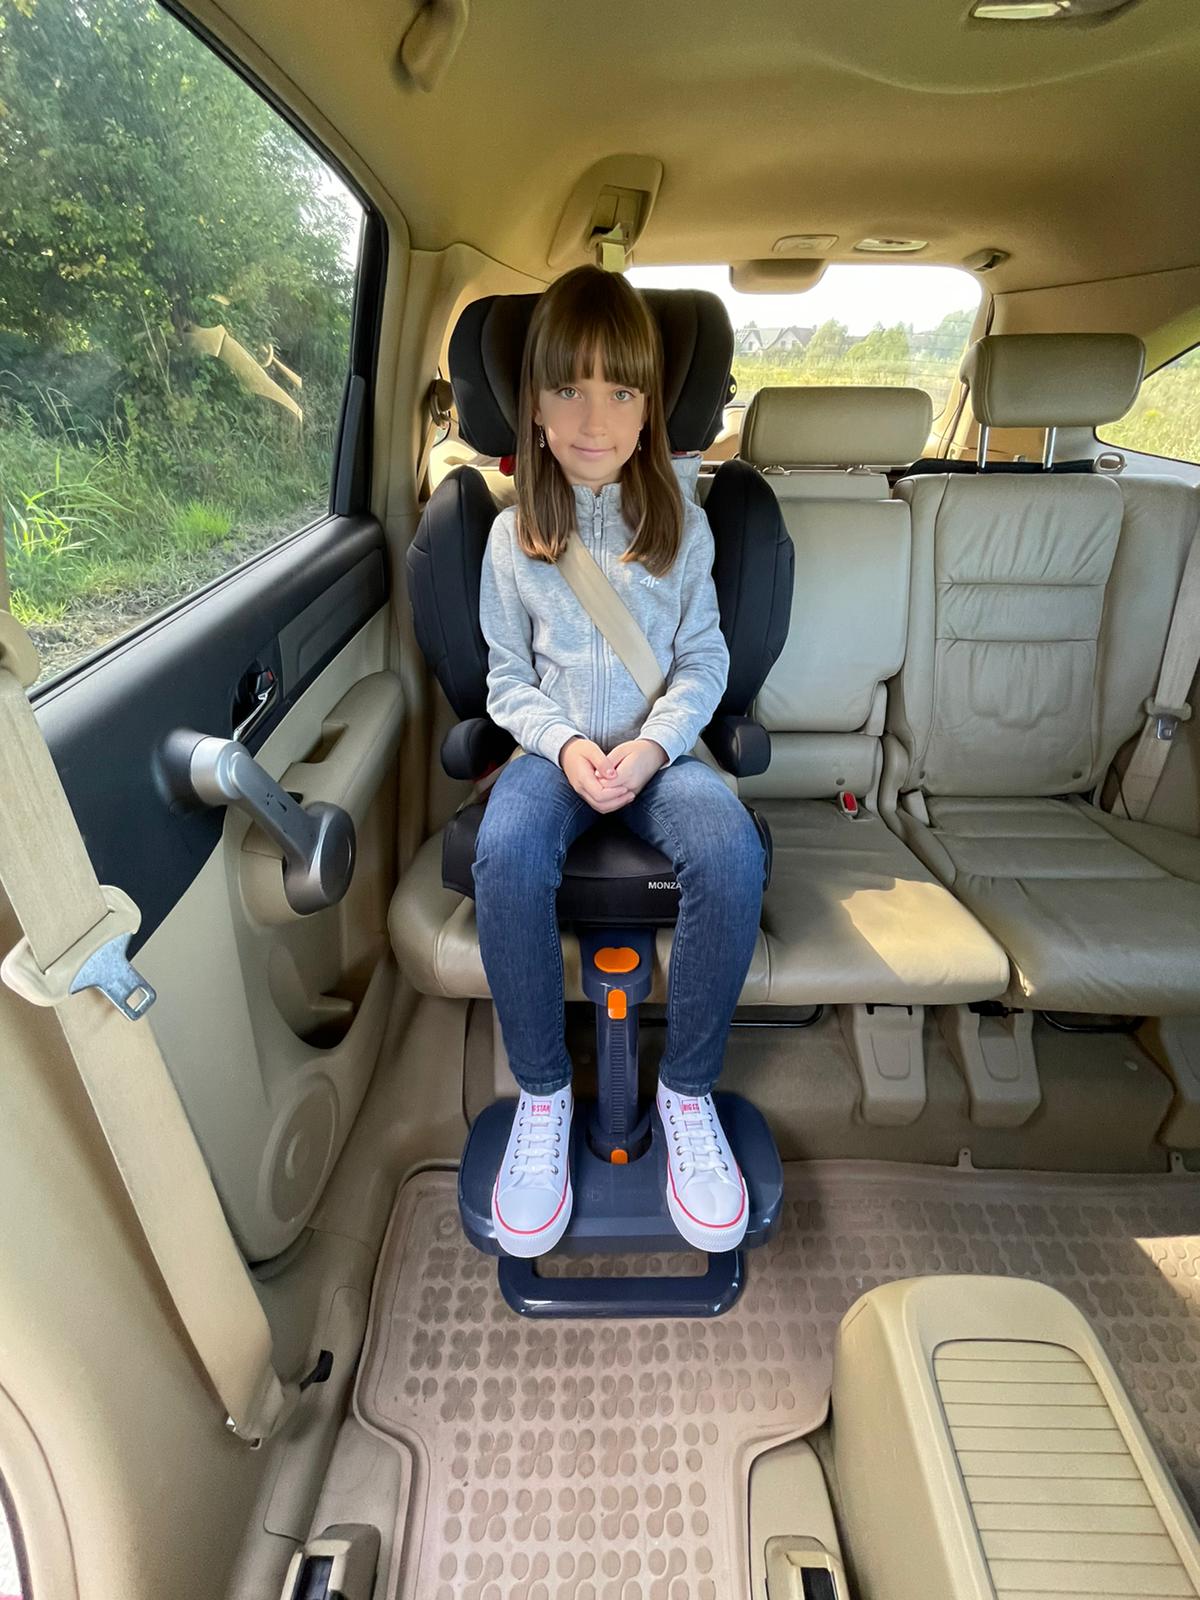  Beberoot Kids Car Seat Foot Rest - Protect Your Kids Knees  with Footrest : Baby